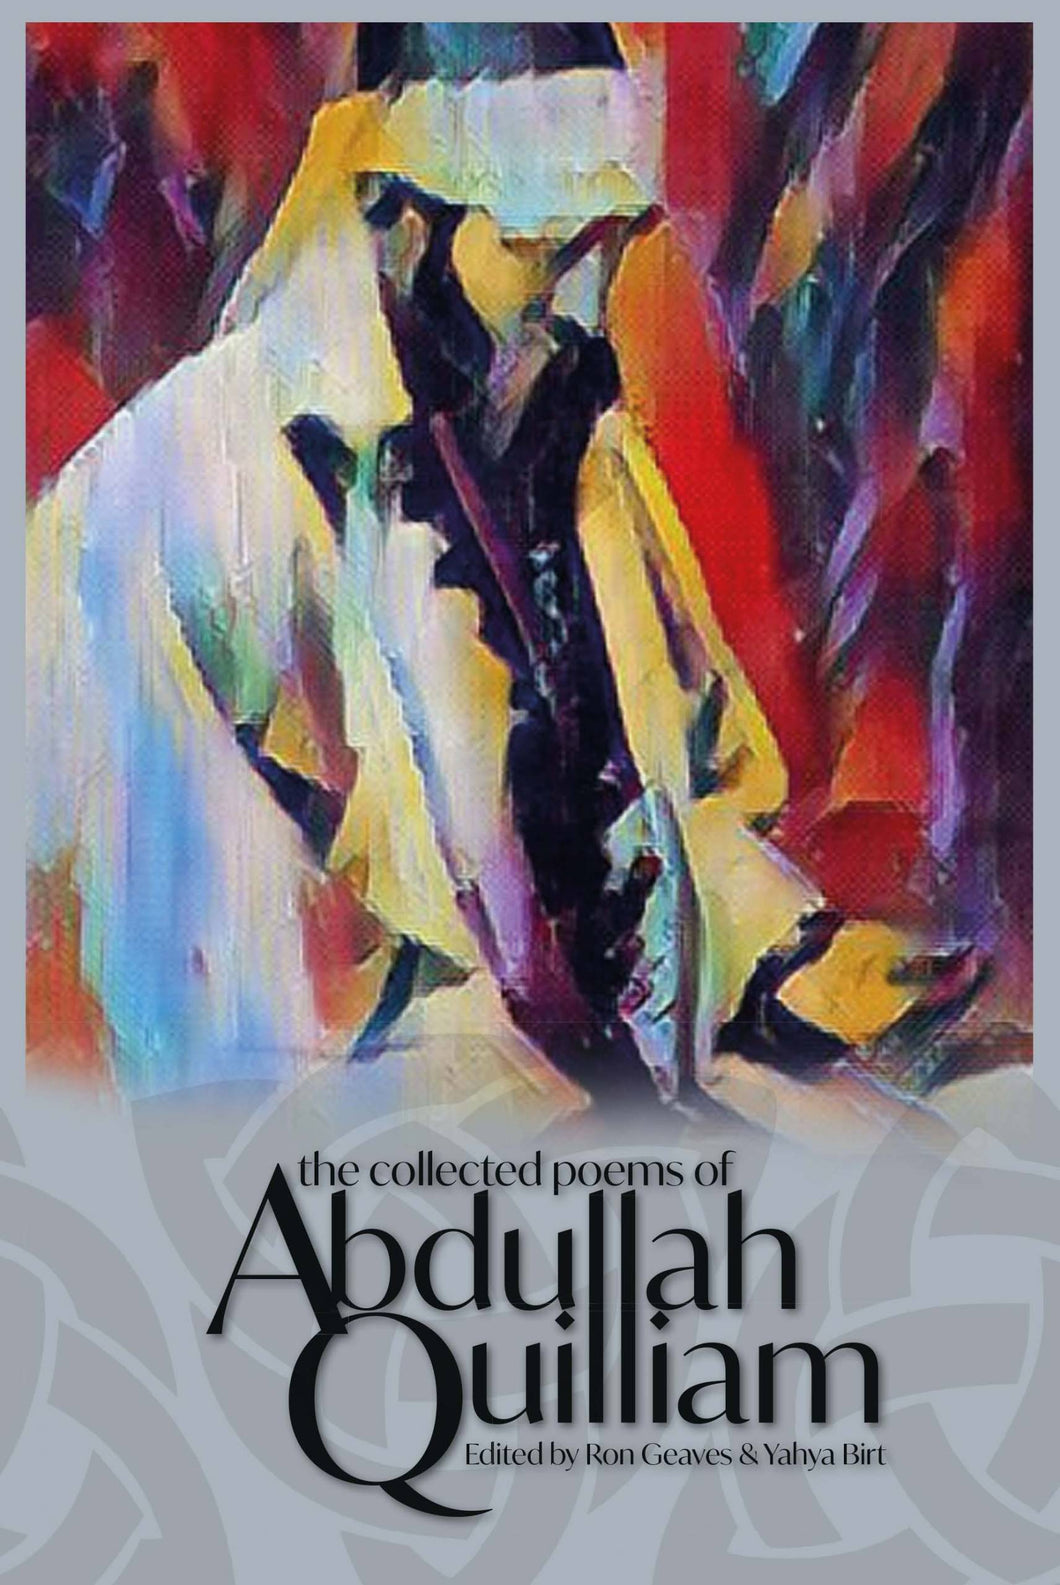 The Collected Poems of Abdullah Quilliam